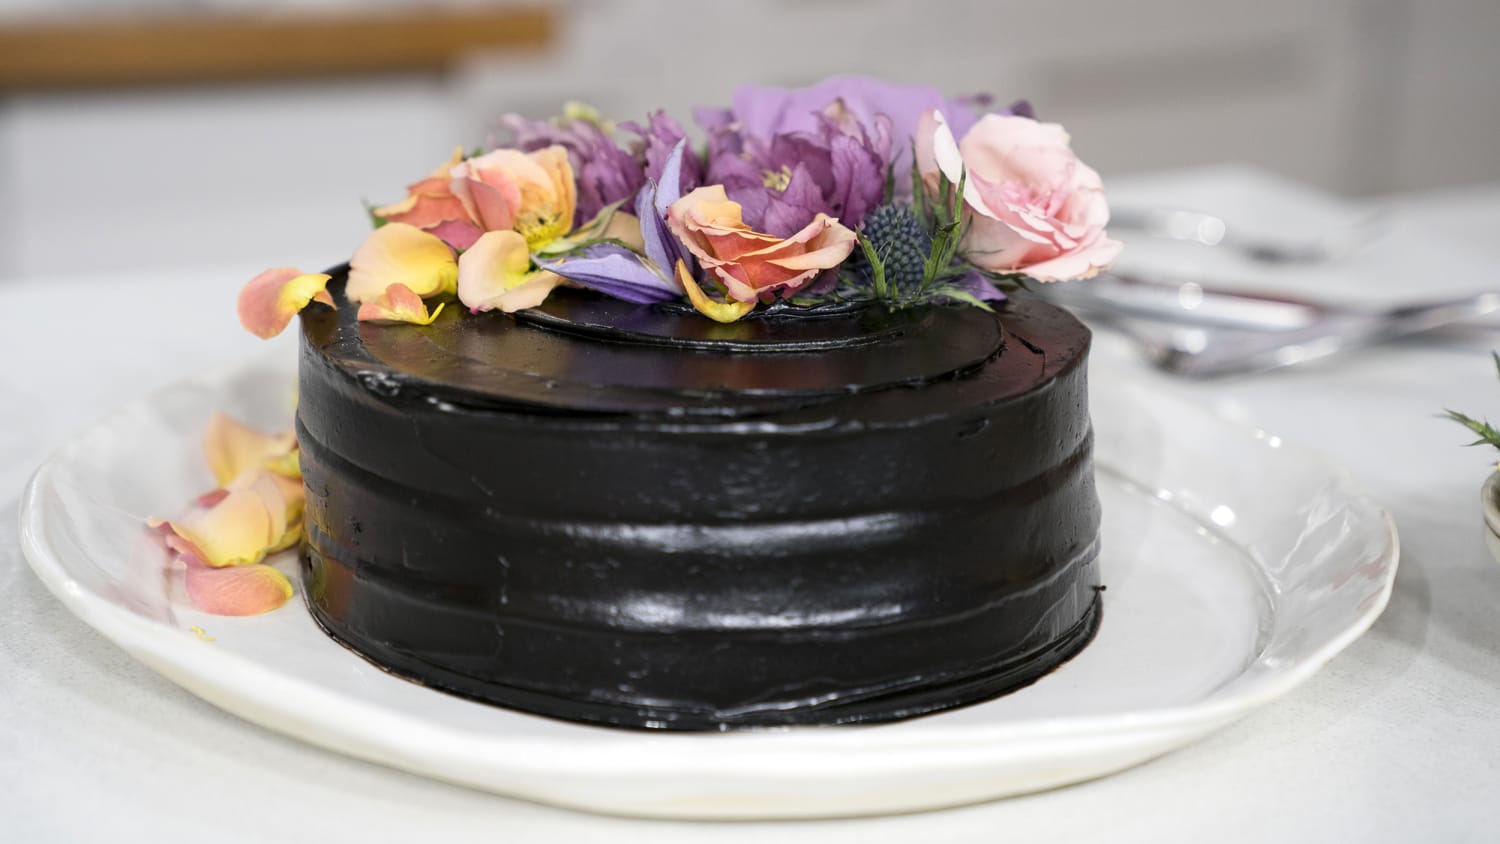 15 Of The Most Beautiful Cakes You'll Ever See In Your Life